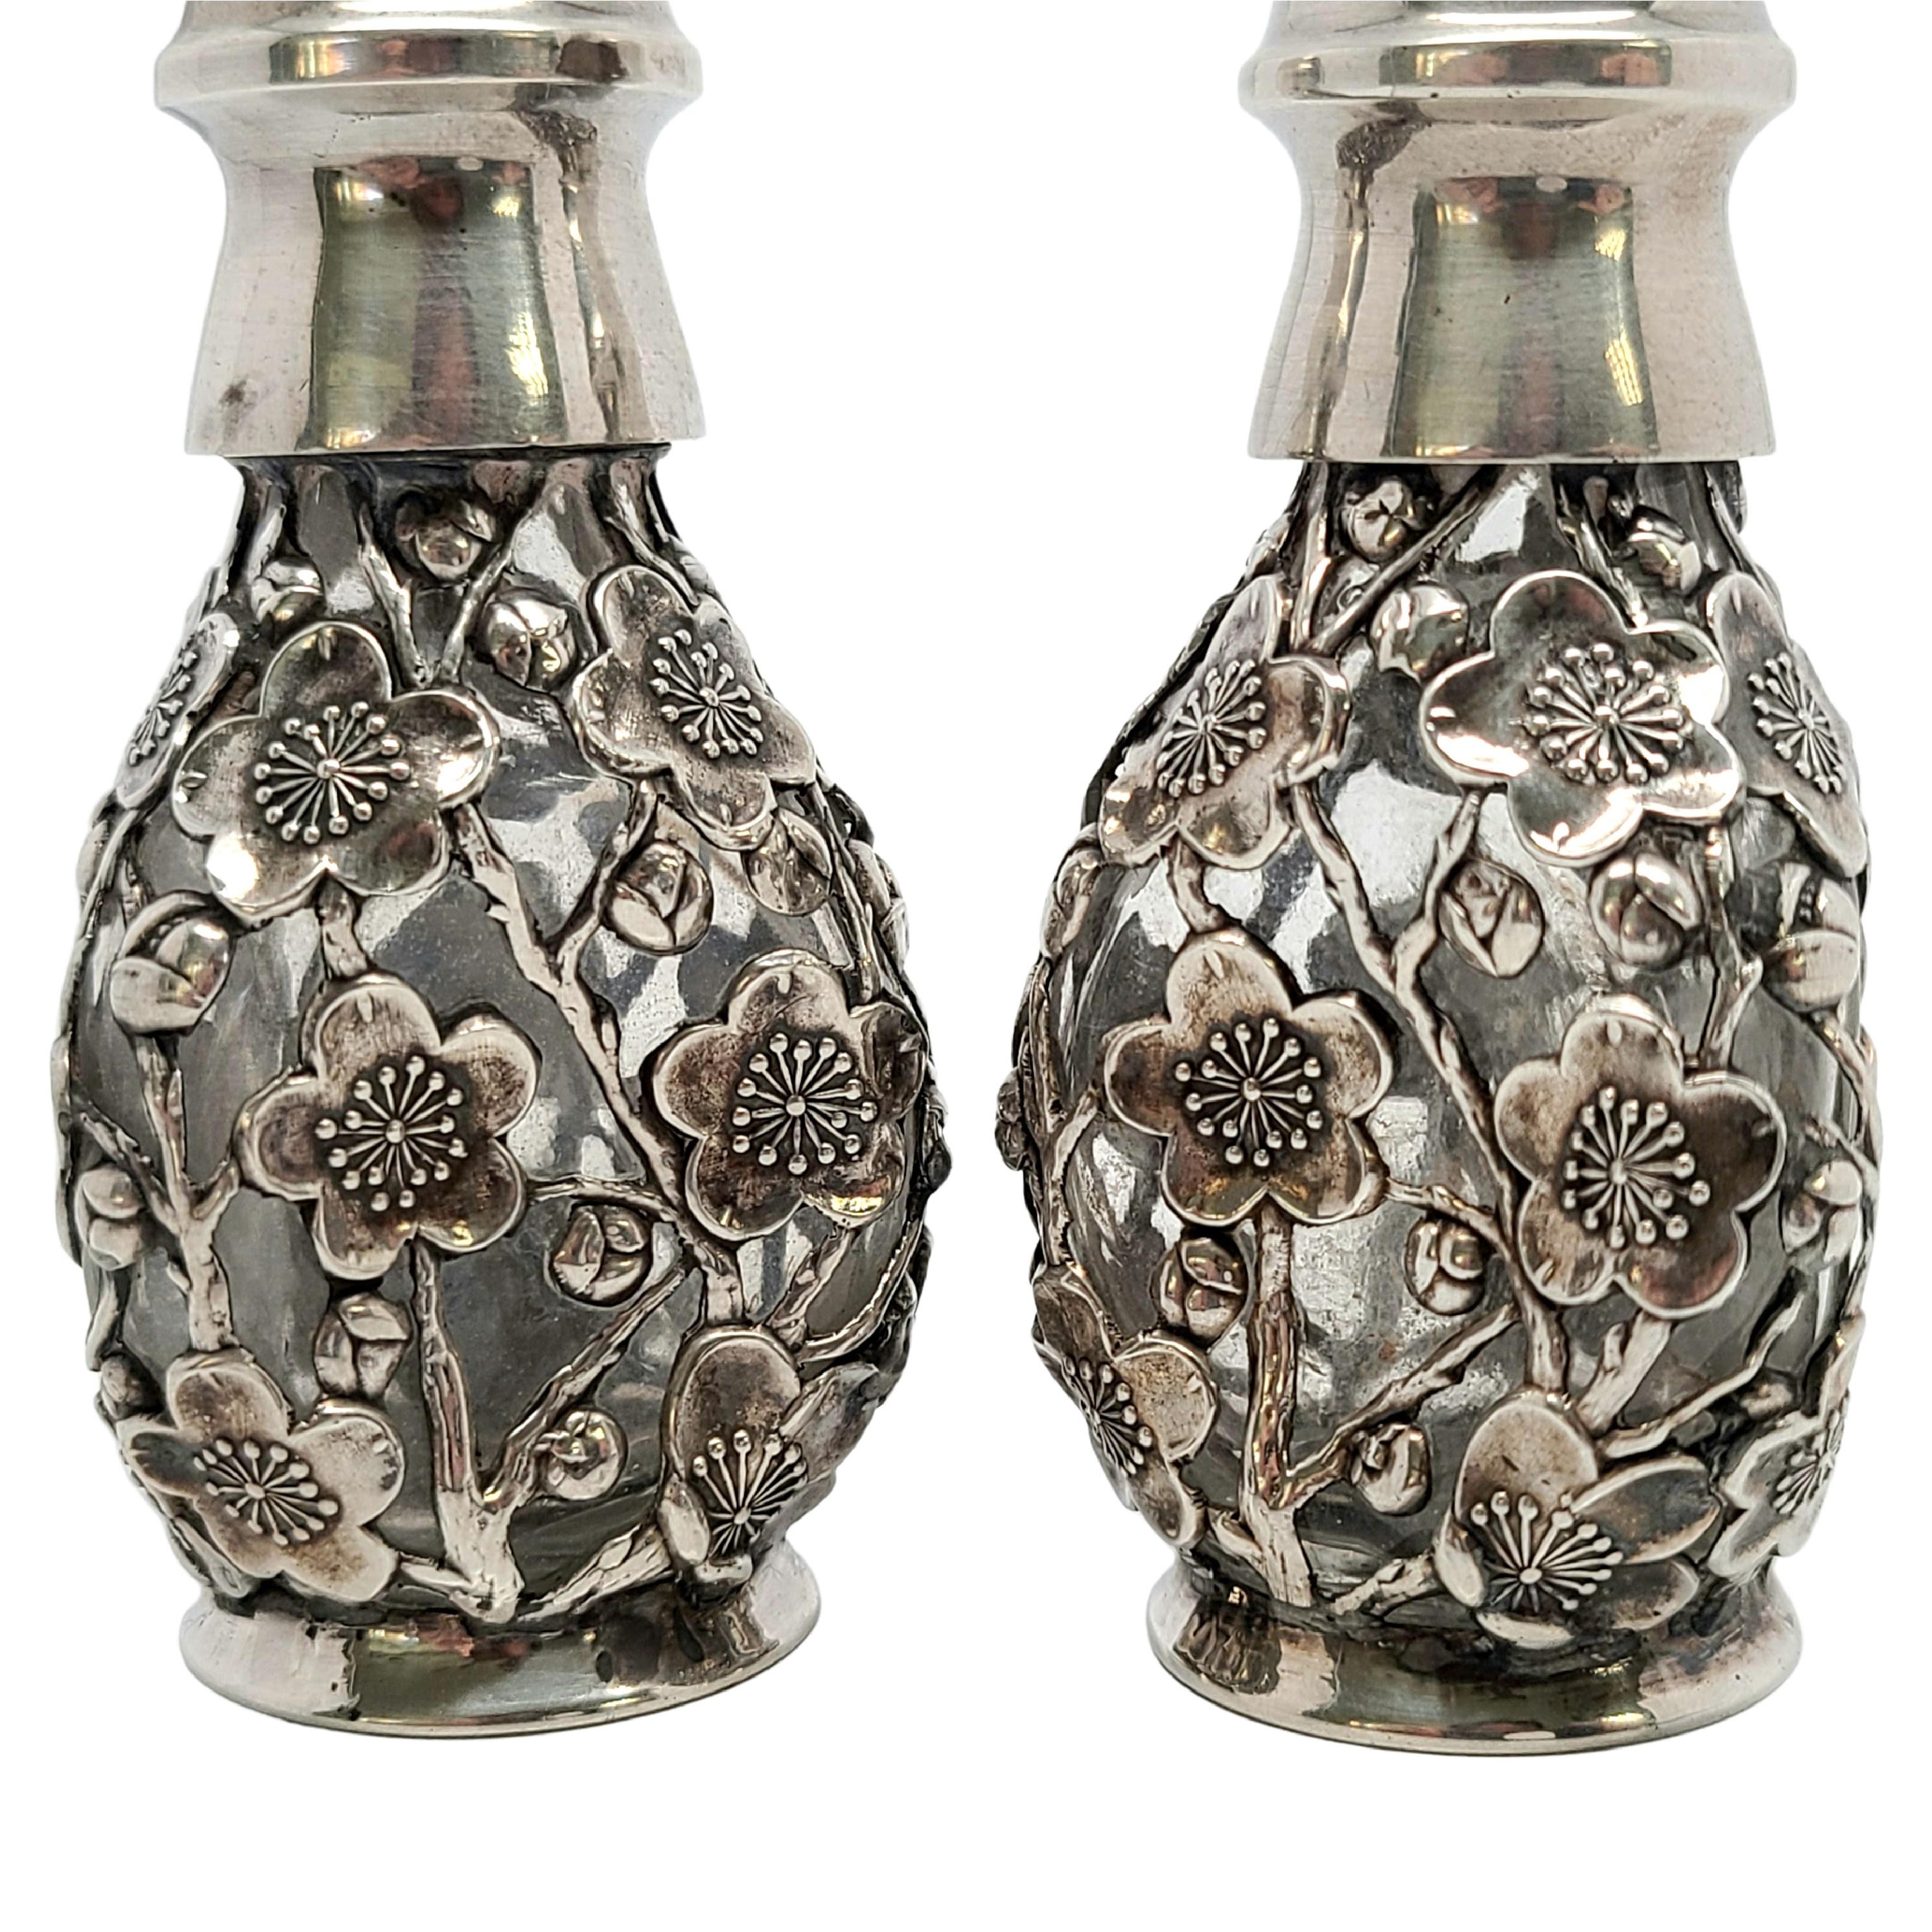 Japanese Cherry Blossom 950 Sterling Silver Over Glass Salt and Pepper Shakers 2